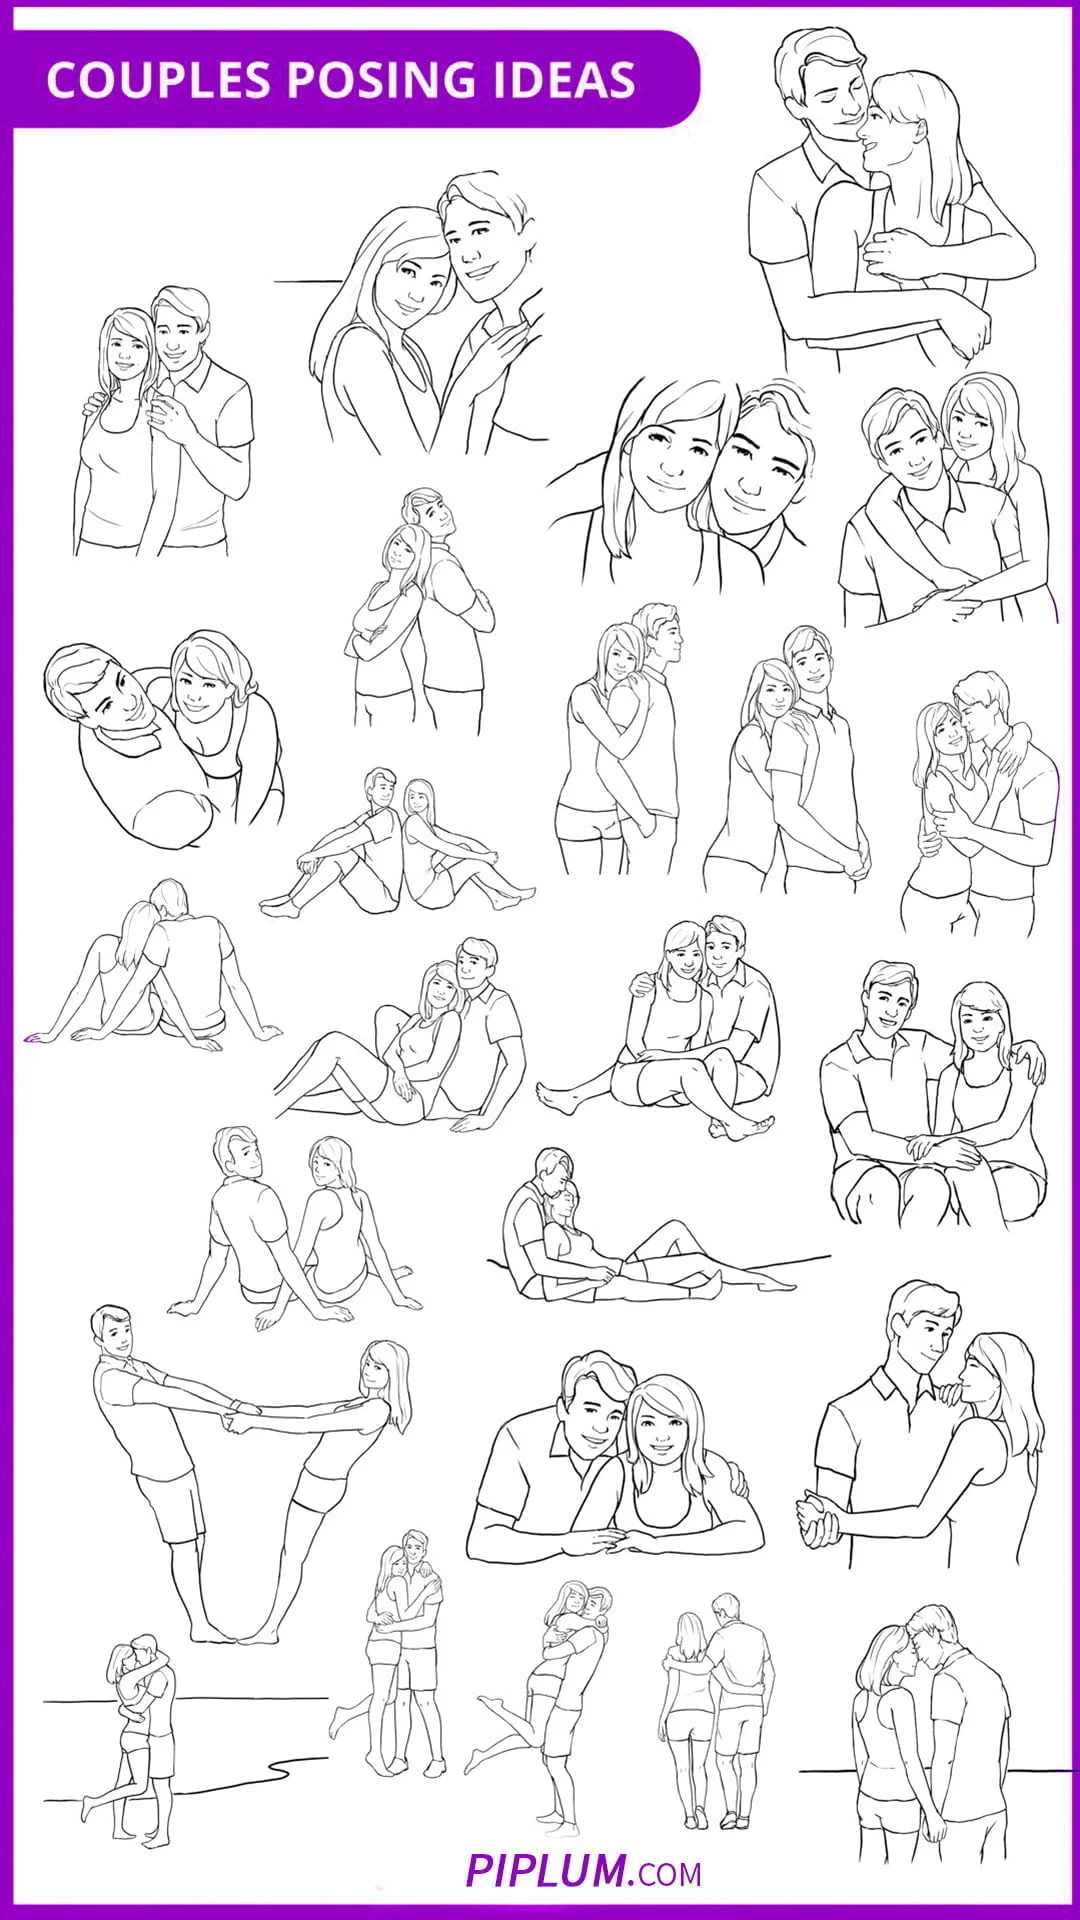 Selfie Poses for Couples - Lemon8 Search